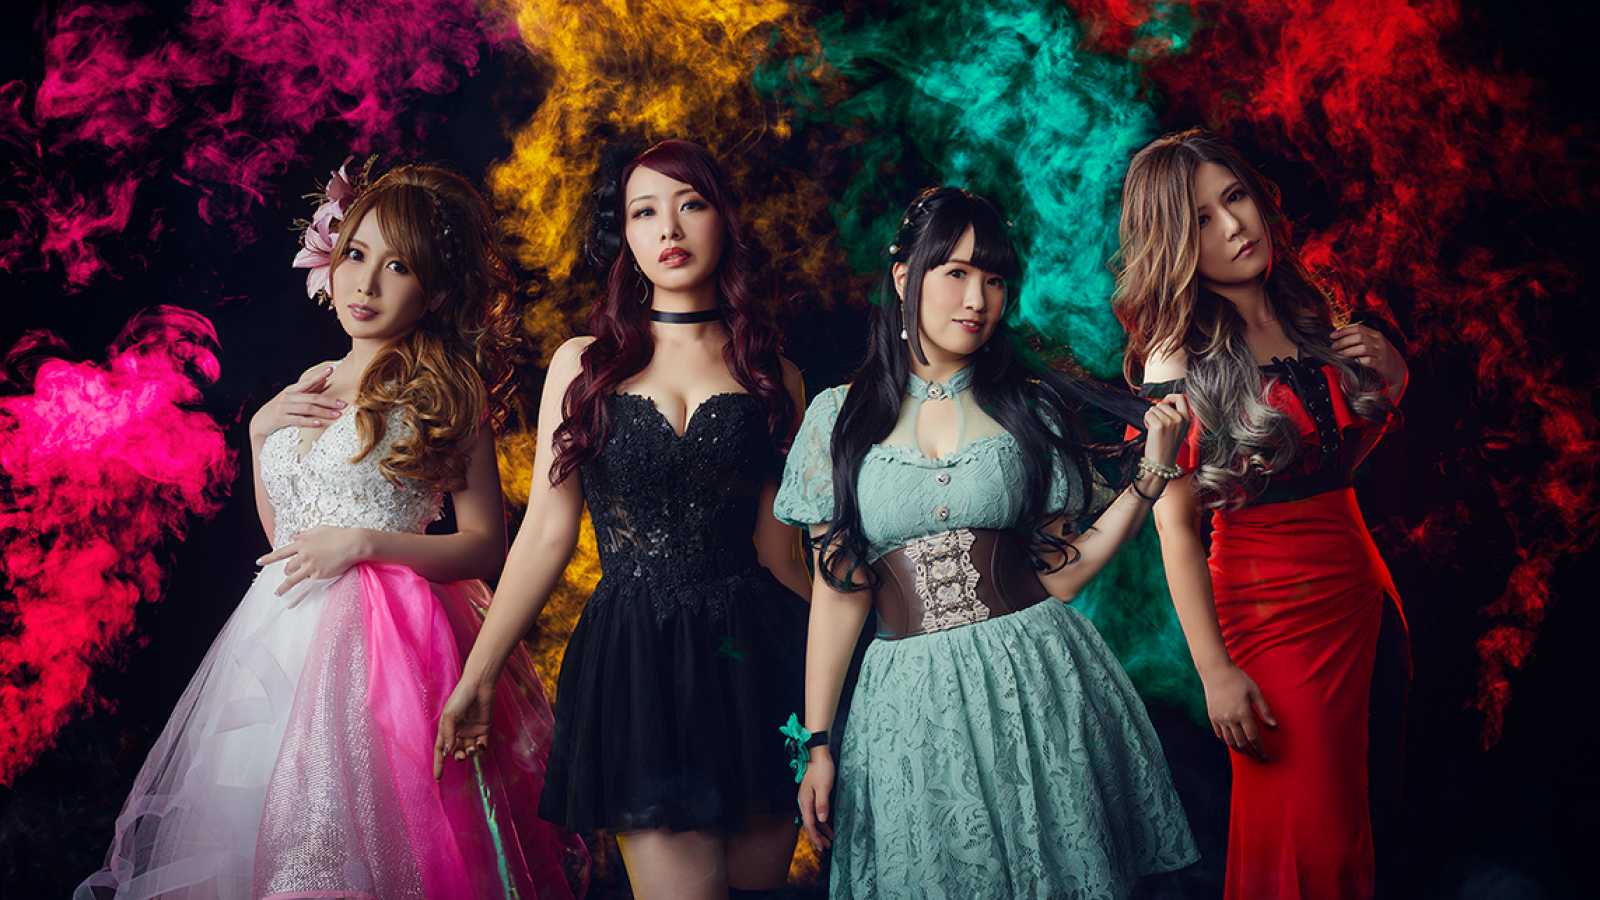 Marina to Leave Aldious © Aldious. All rights reserved.